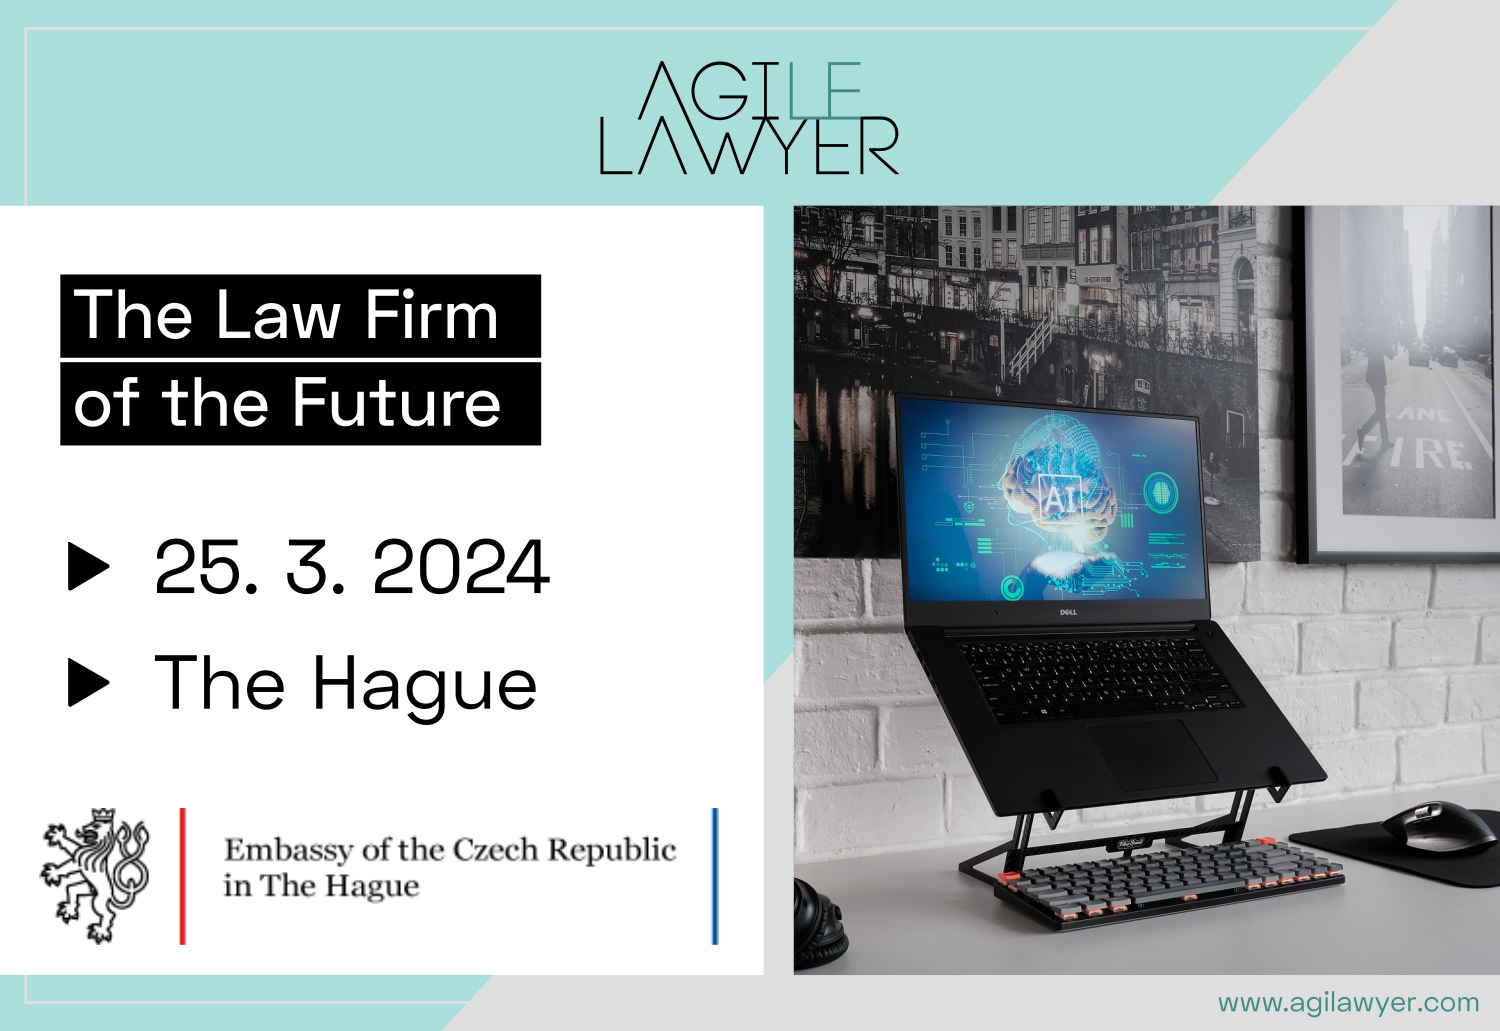 Fireside Chat on "The Law Firm of the Future" in Hague